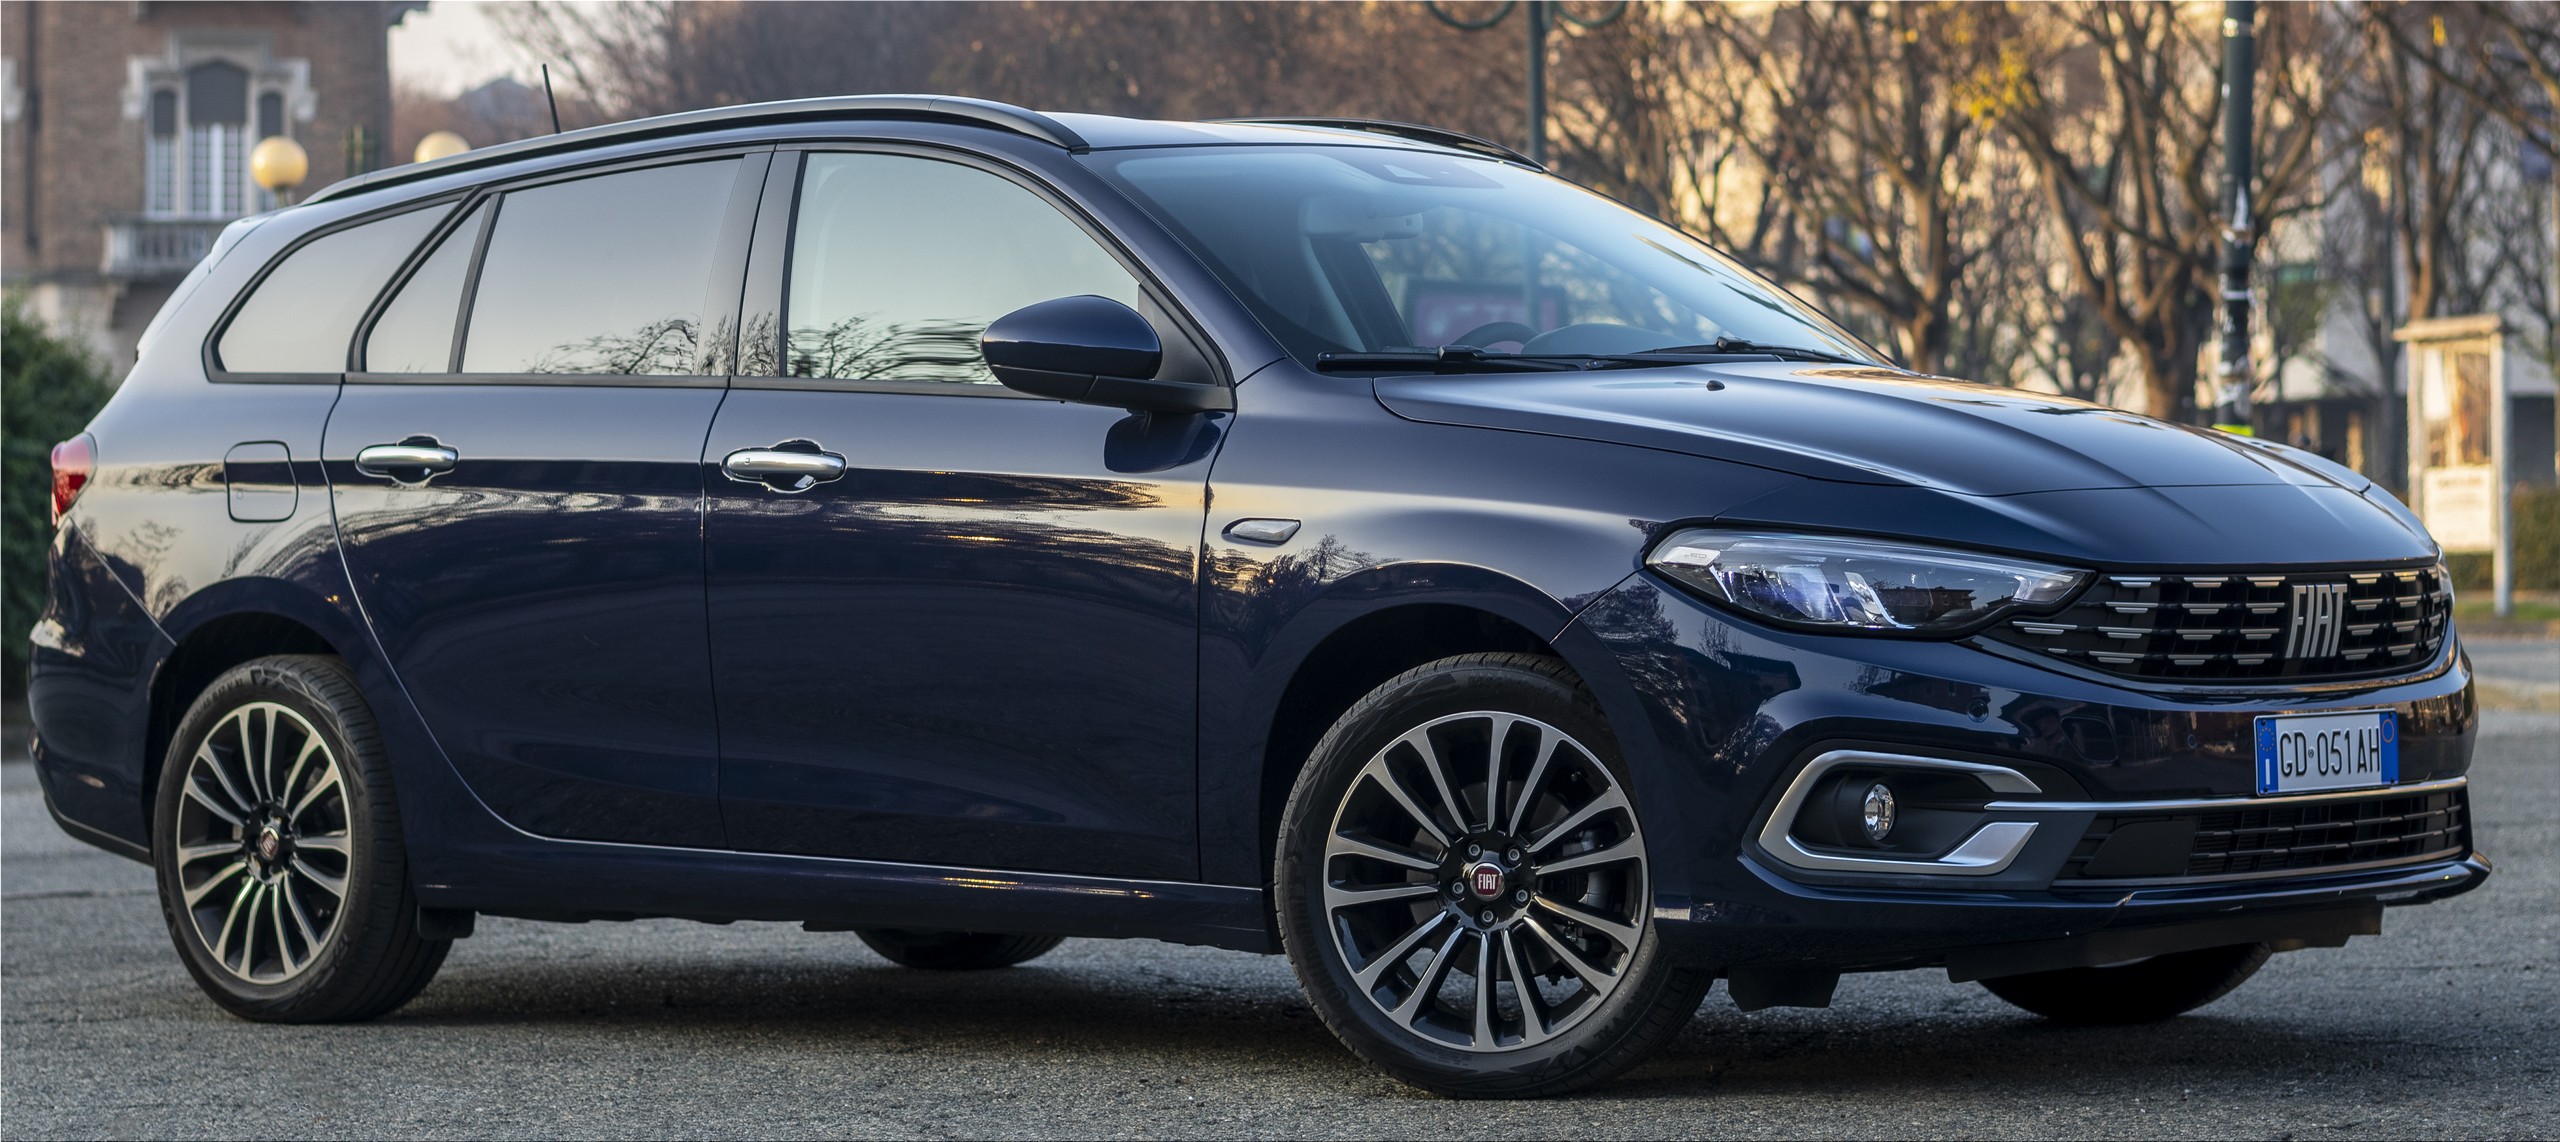 The new Fiat Tipo as a crossover